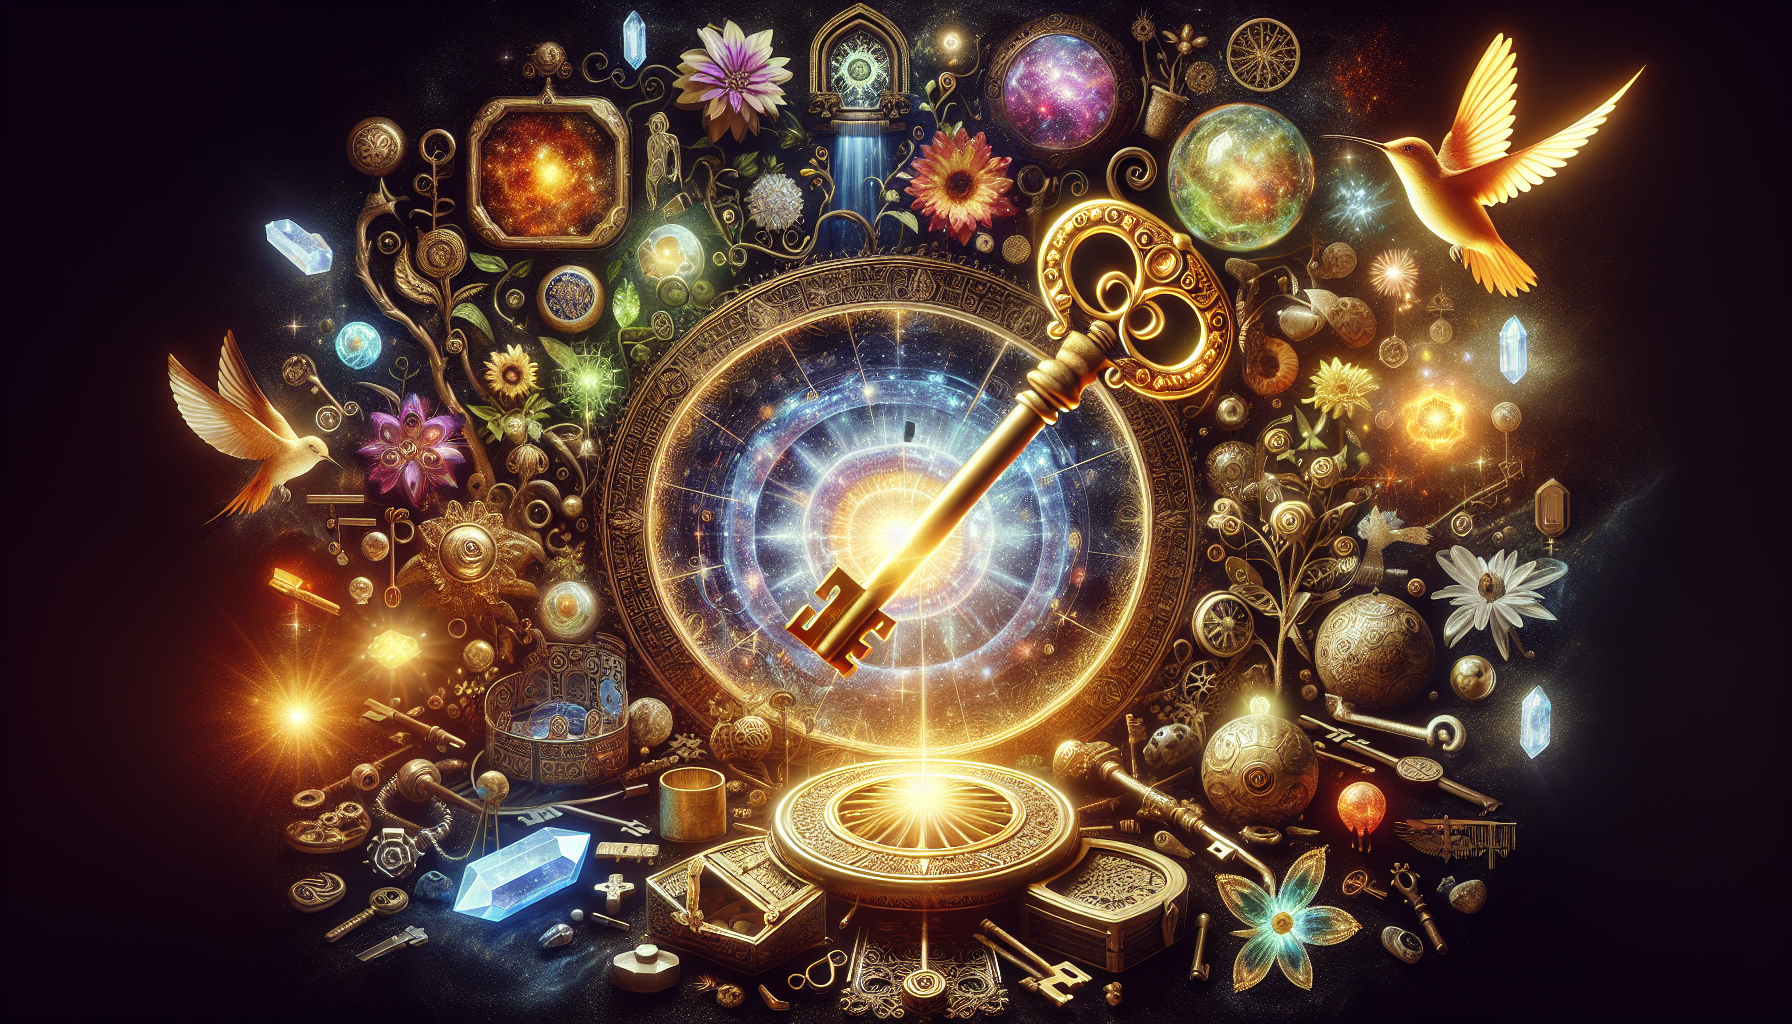 A symbolic representation of unlocking the secrets of the Law of Attraction. In the center, a large, antique key cut from pure gold is about to open a glowing, intricate lock that